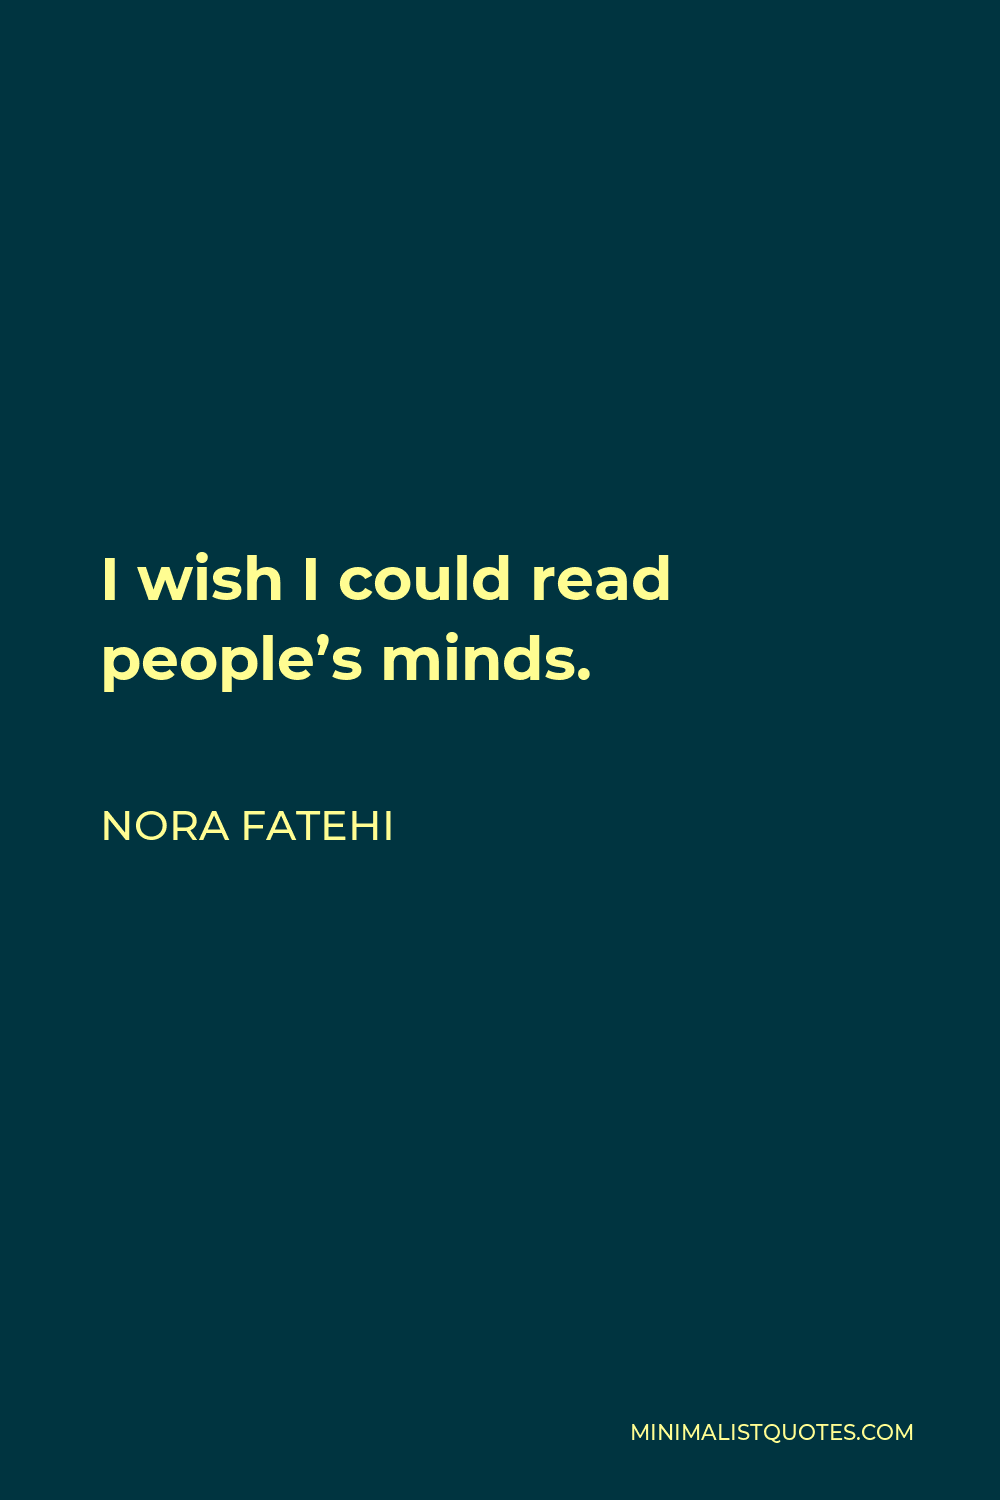 Nora Fatehi Quote - I wish I could read people’s minds.